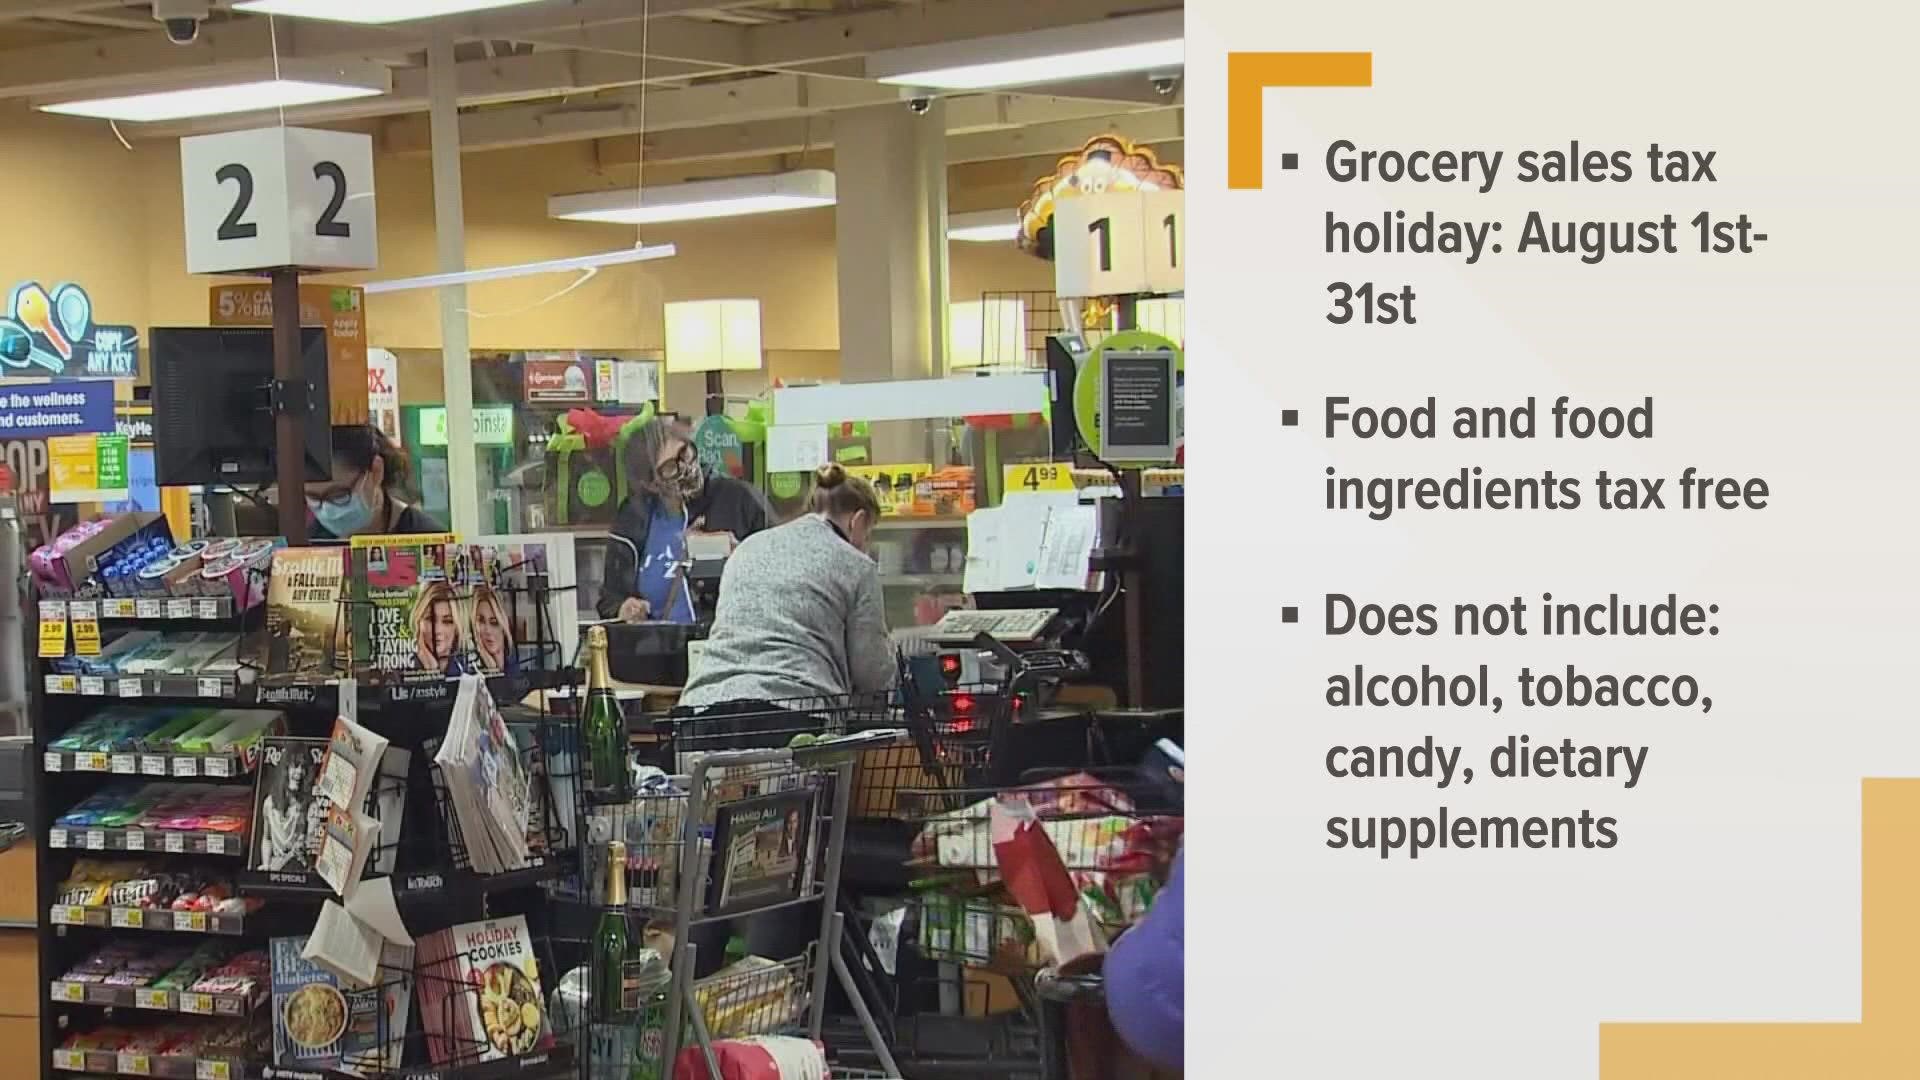 The grocery sales tax holiday will end on August 31st at 11:59 p.m.